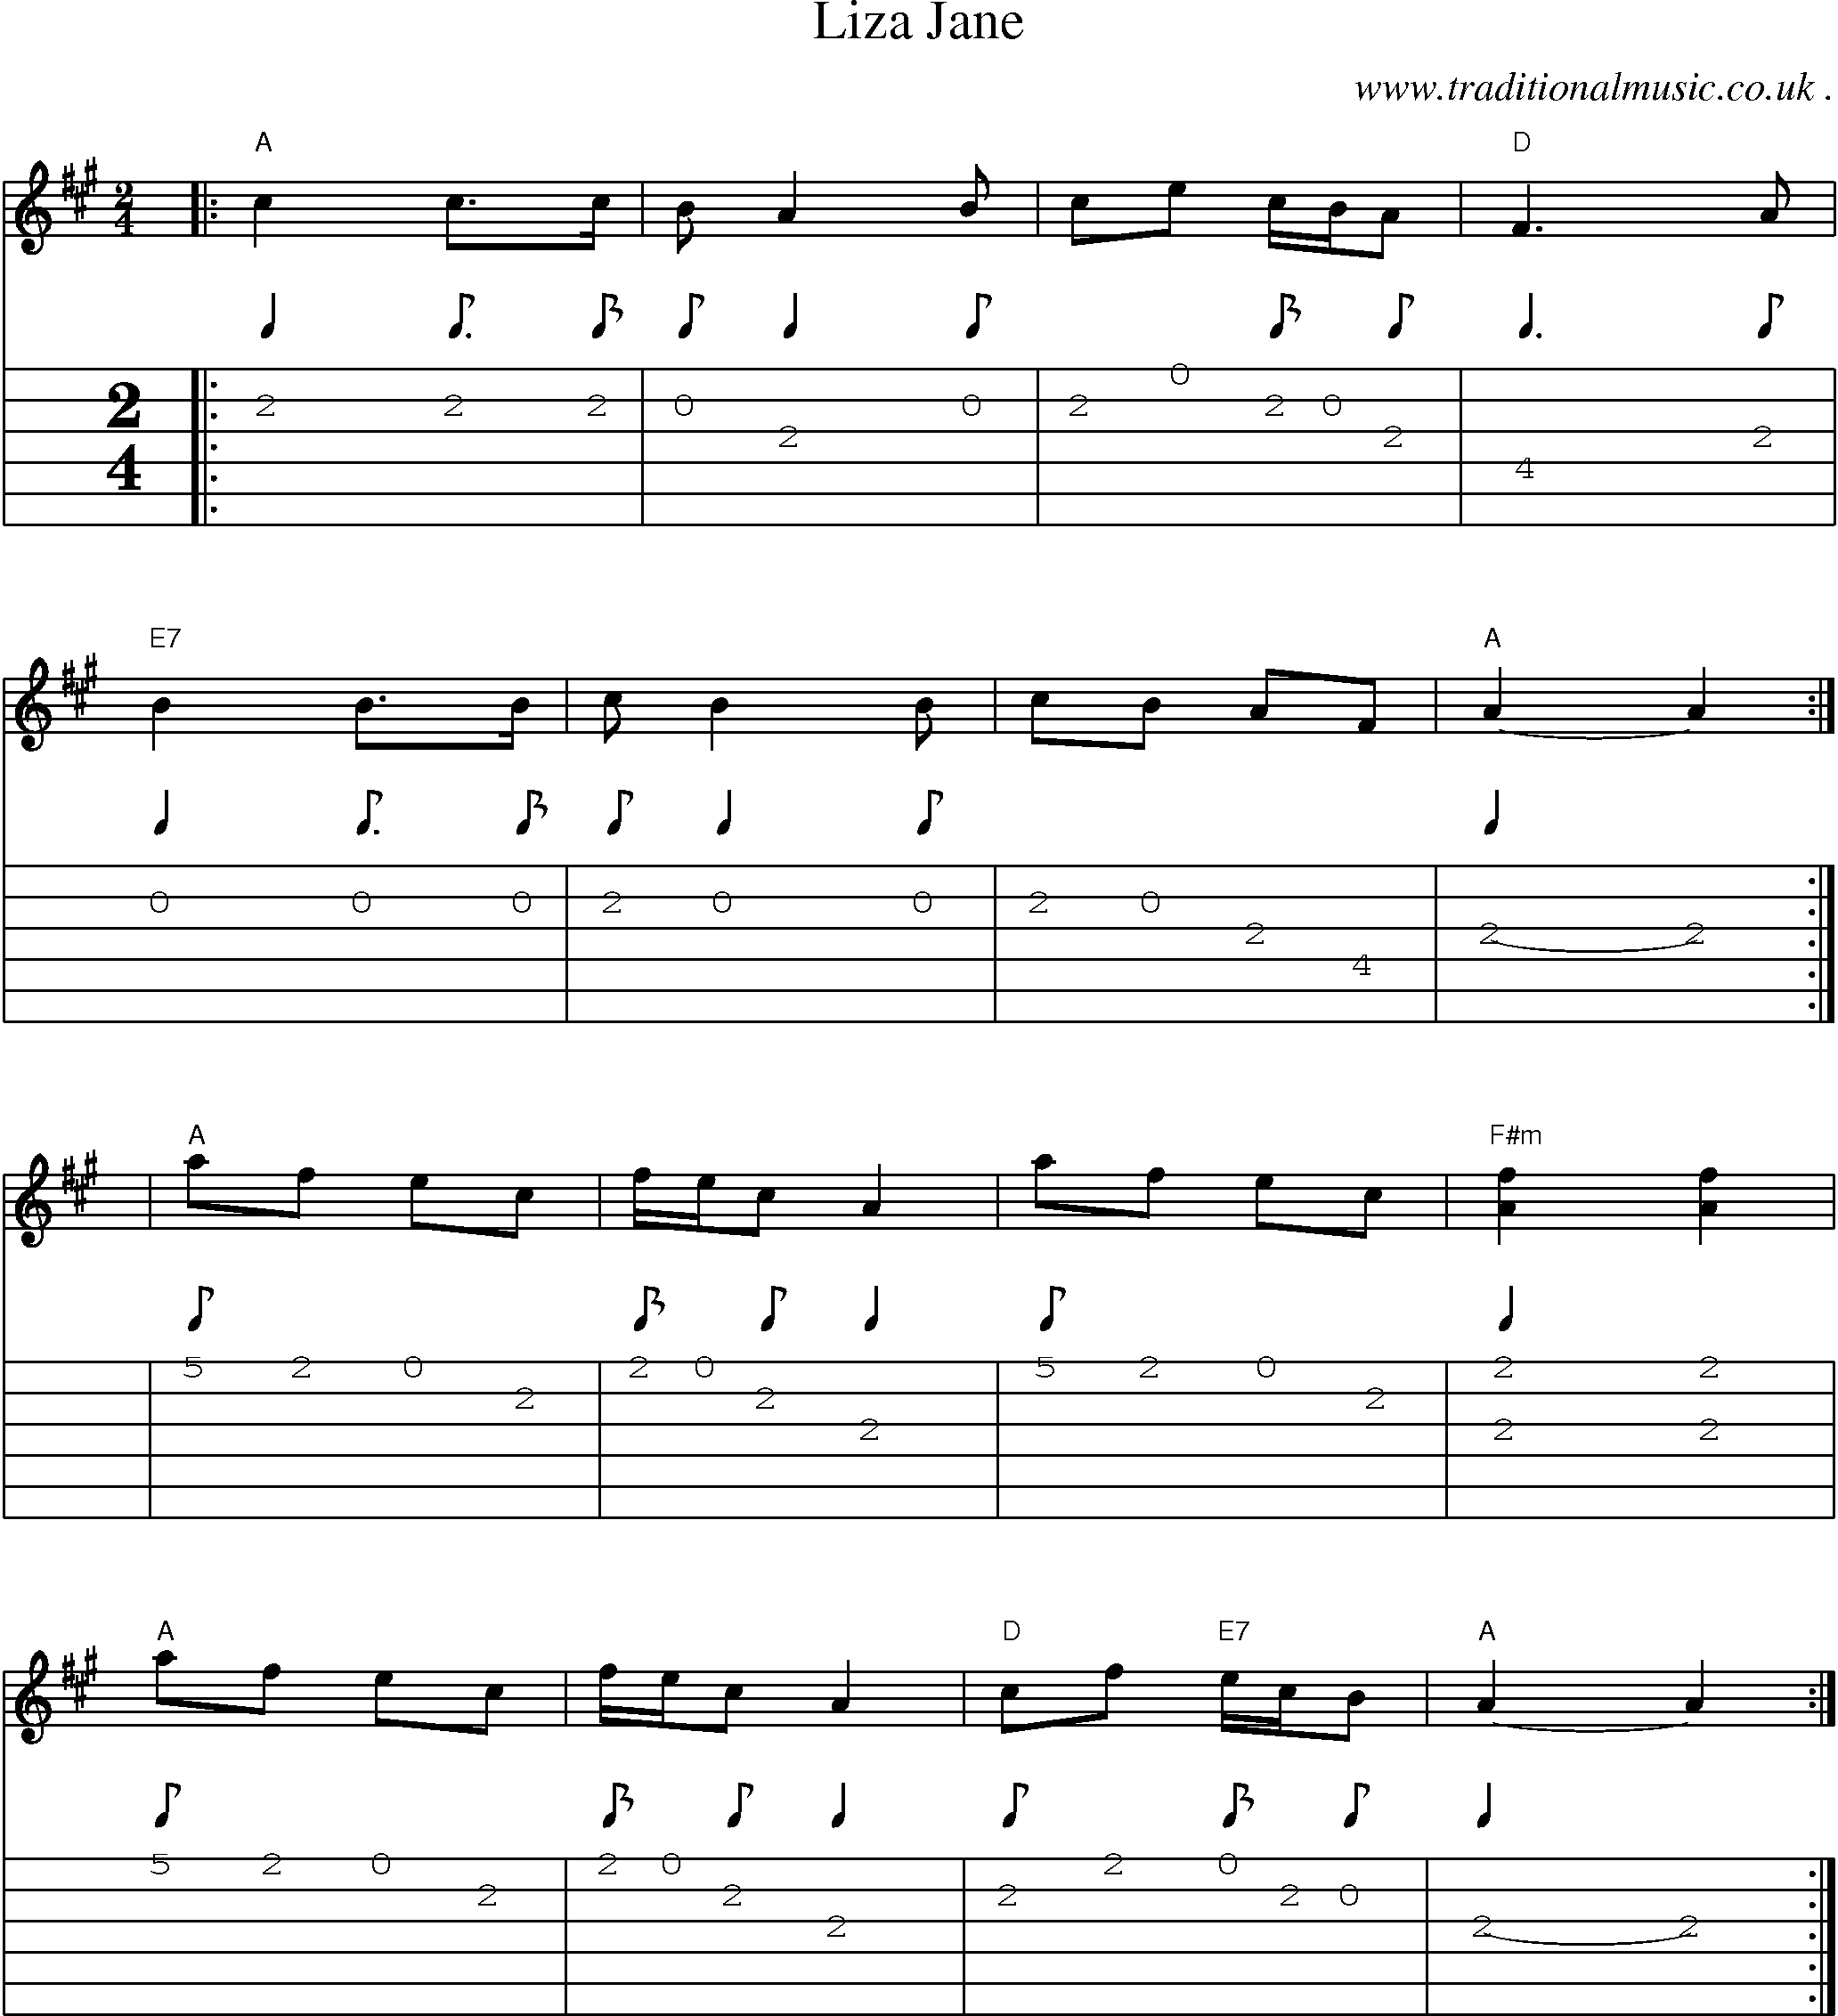 Music Score and Guitar Tabs for Liza Jane